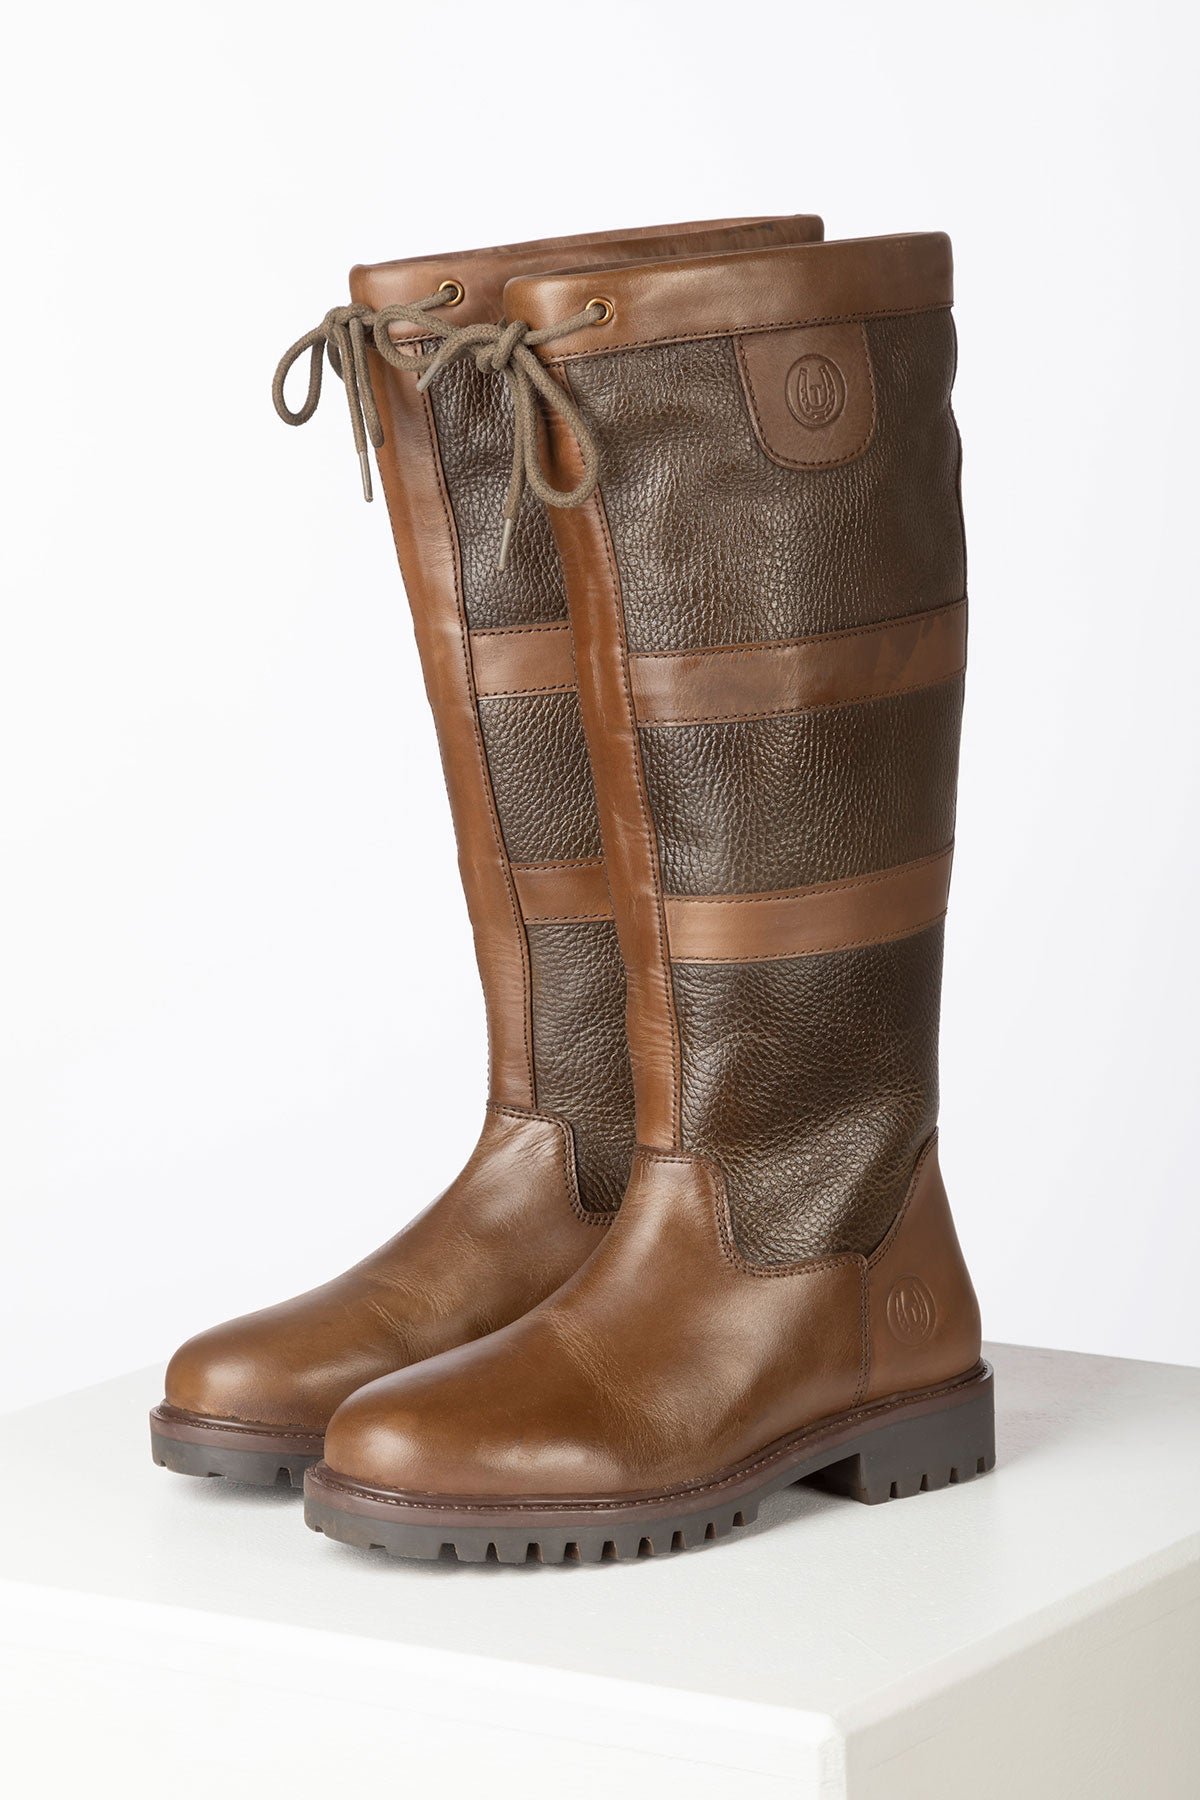 Men's Knee High Boots UK | Tullymore Country Long Boots - Rydale